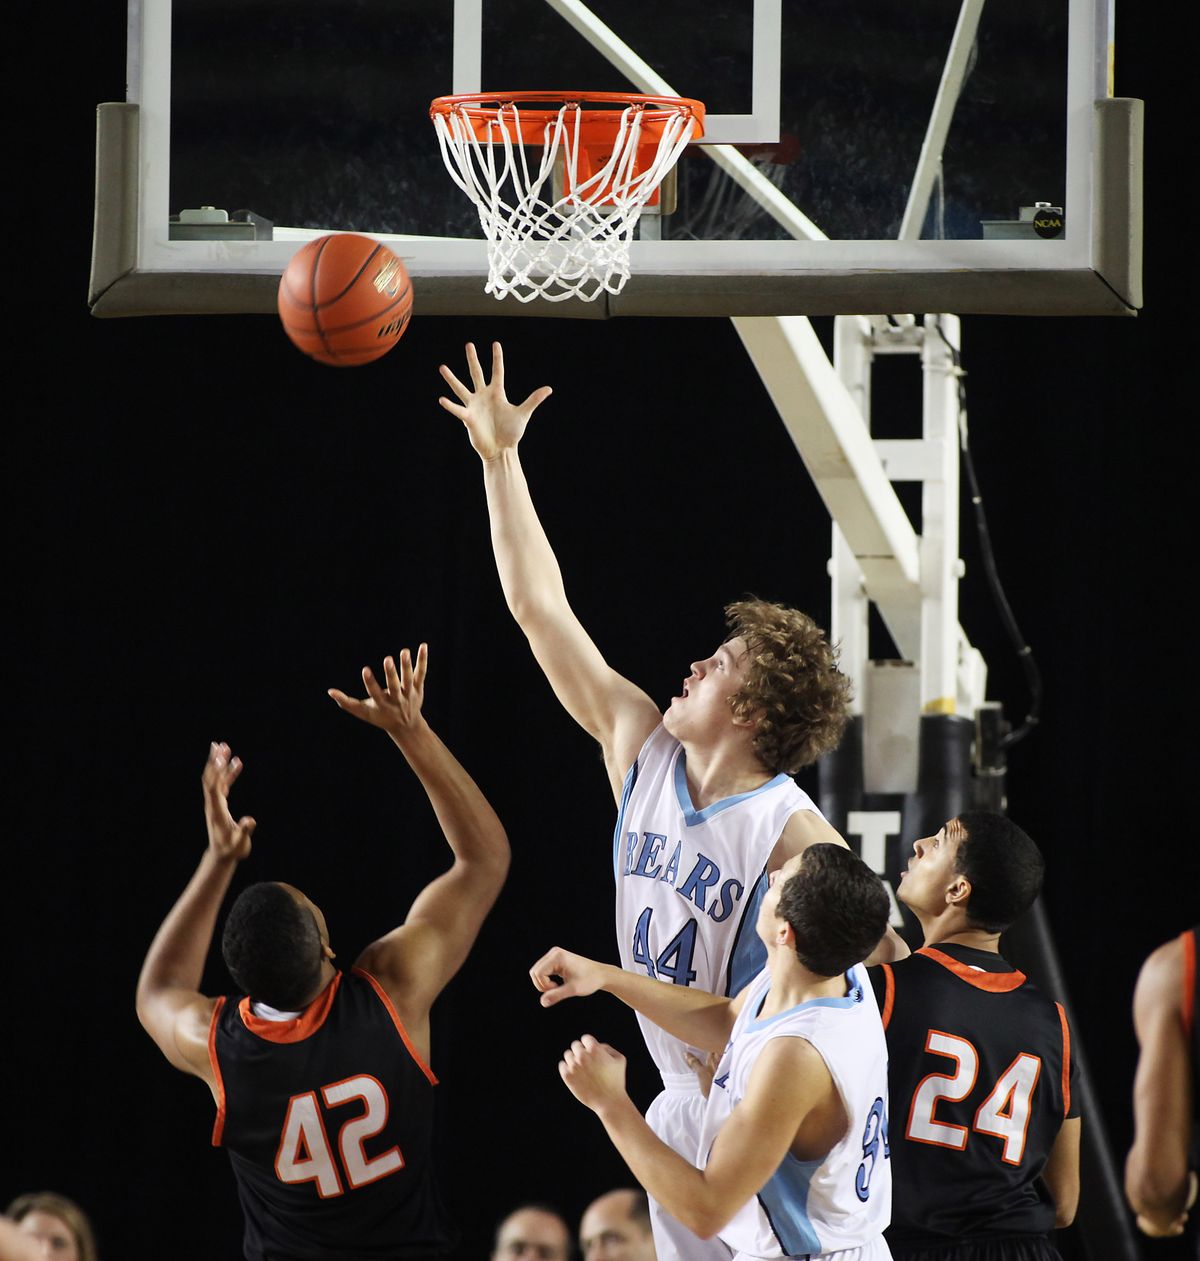 Central Valley’s Anthony Brommer attempts to block the shot of Davis’ Levonte Allen during Saturday’s title game. (Patrick Hagerty)